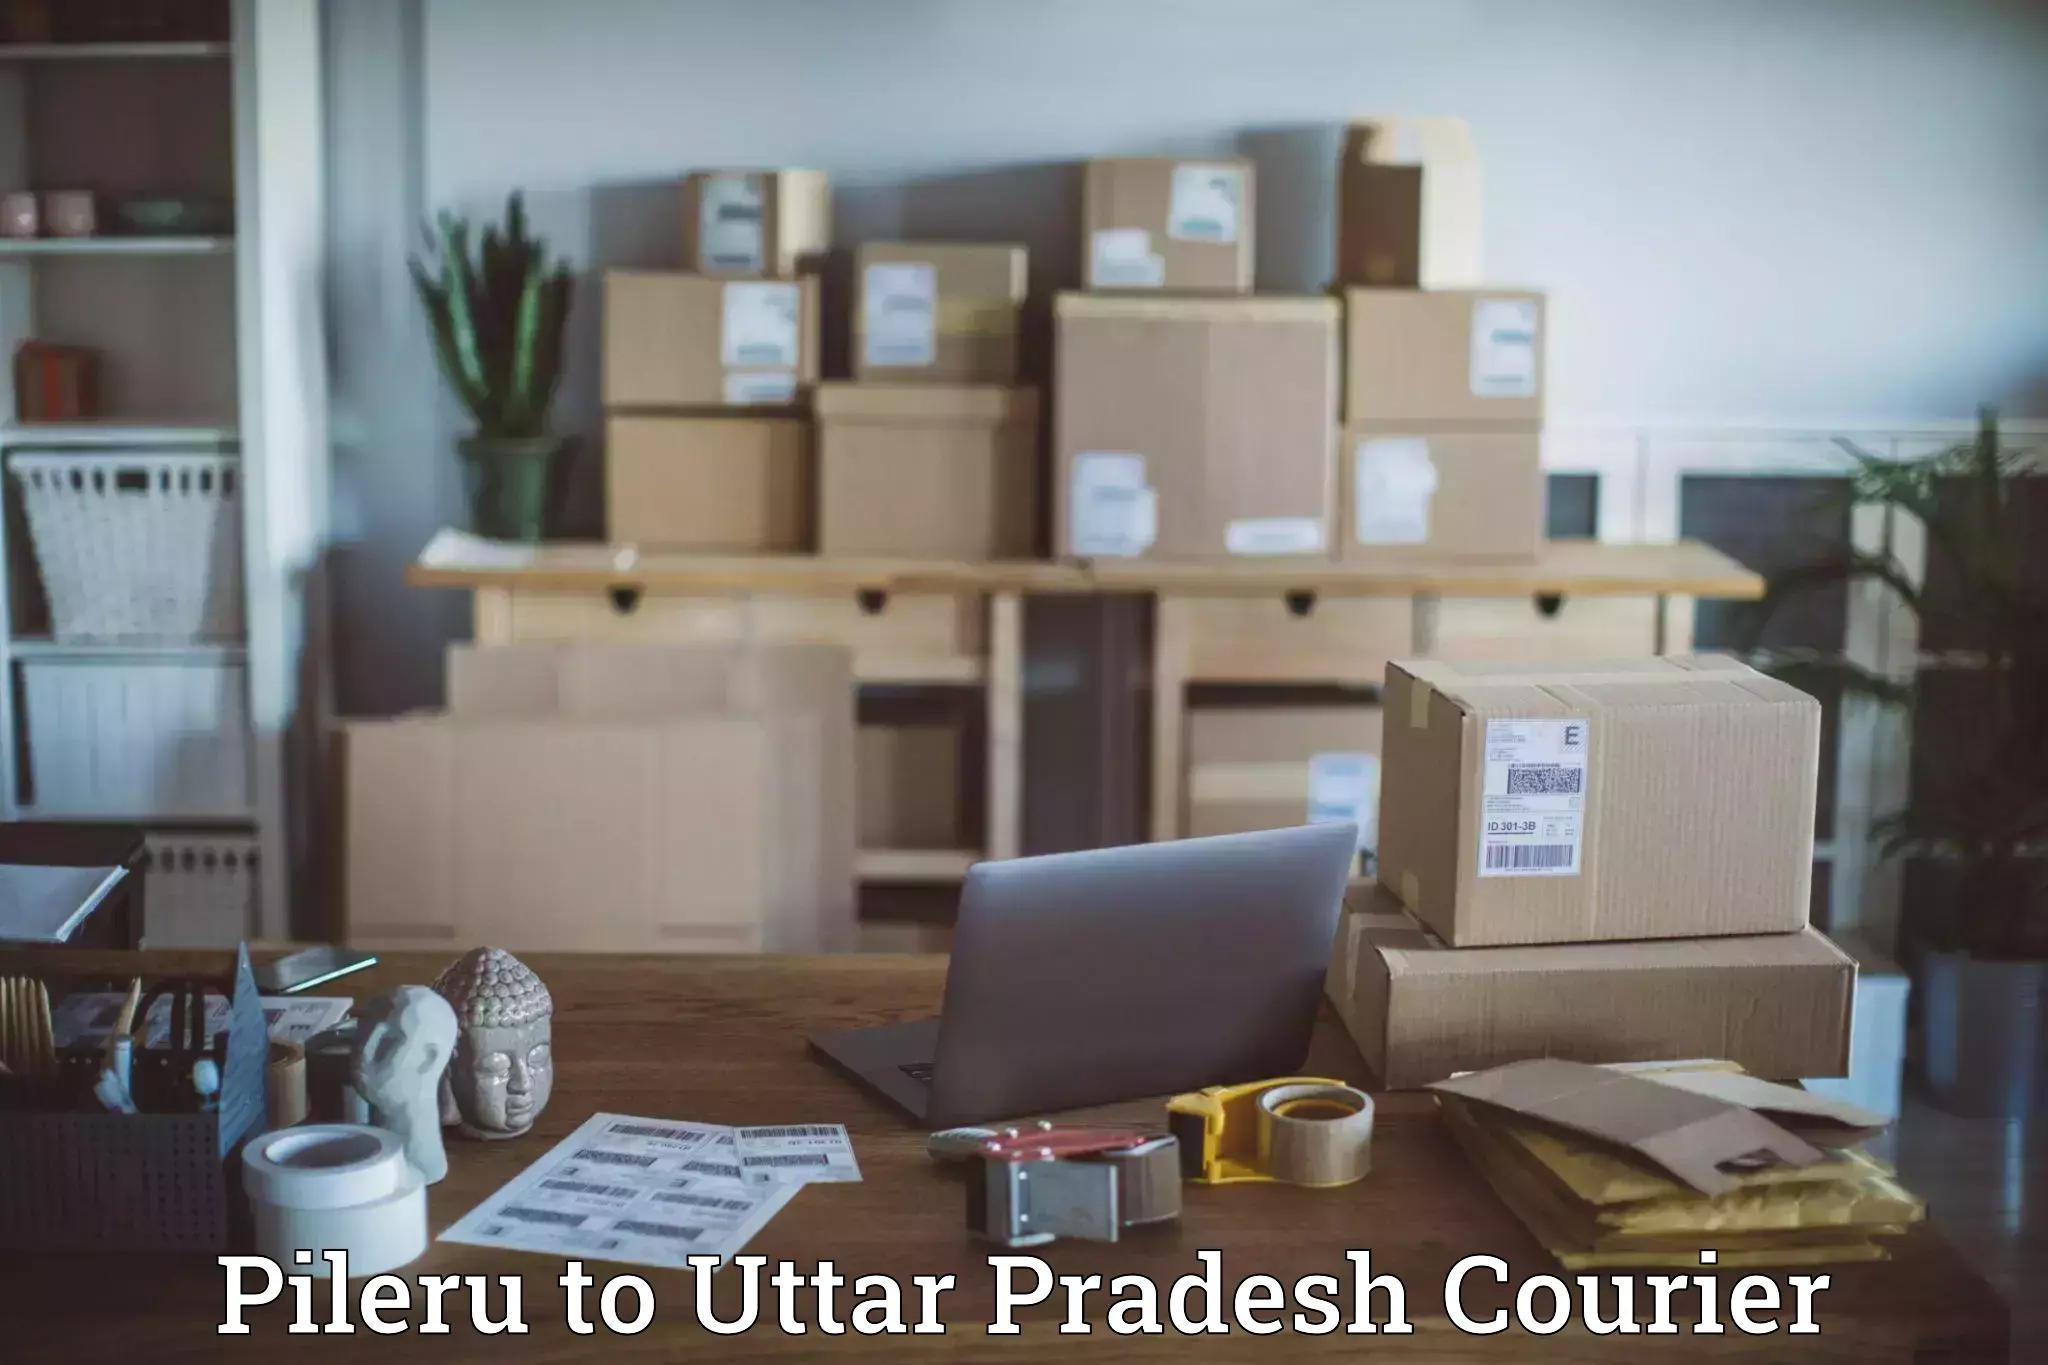 Express delivery solutions Pileru to Aligarh